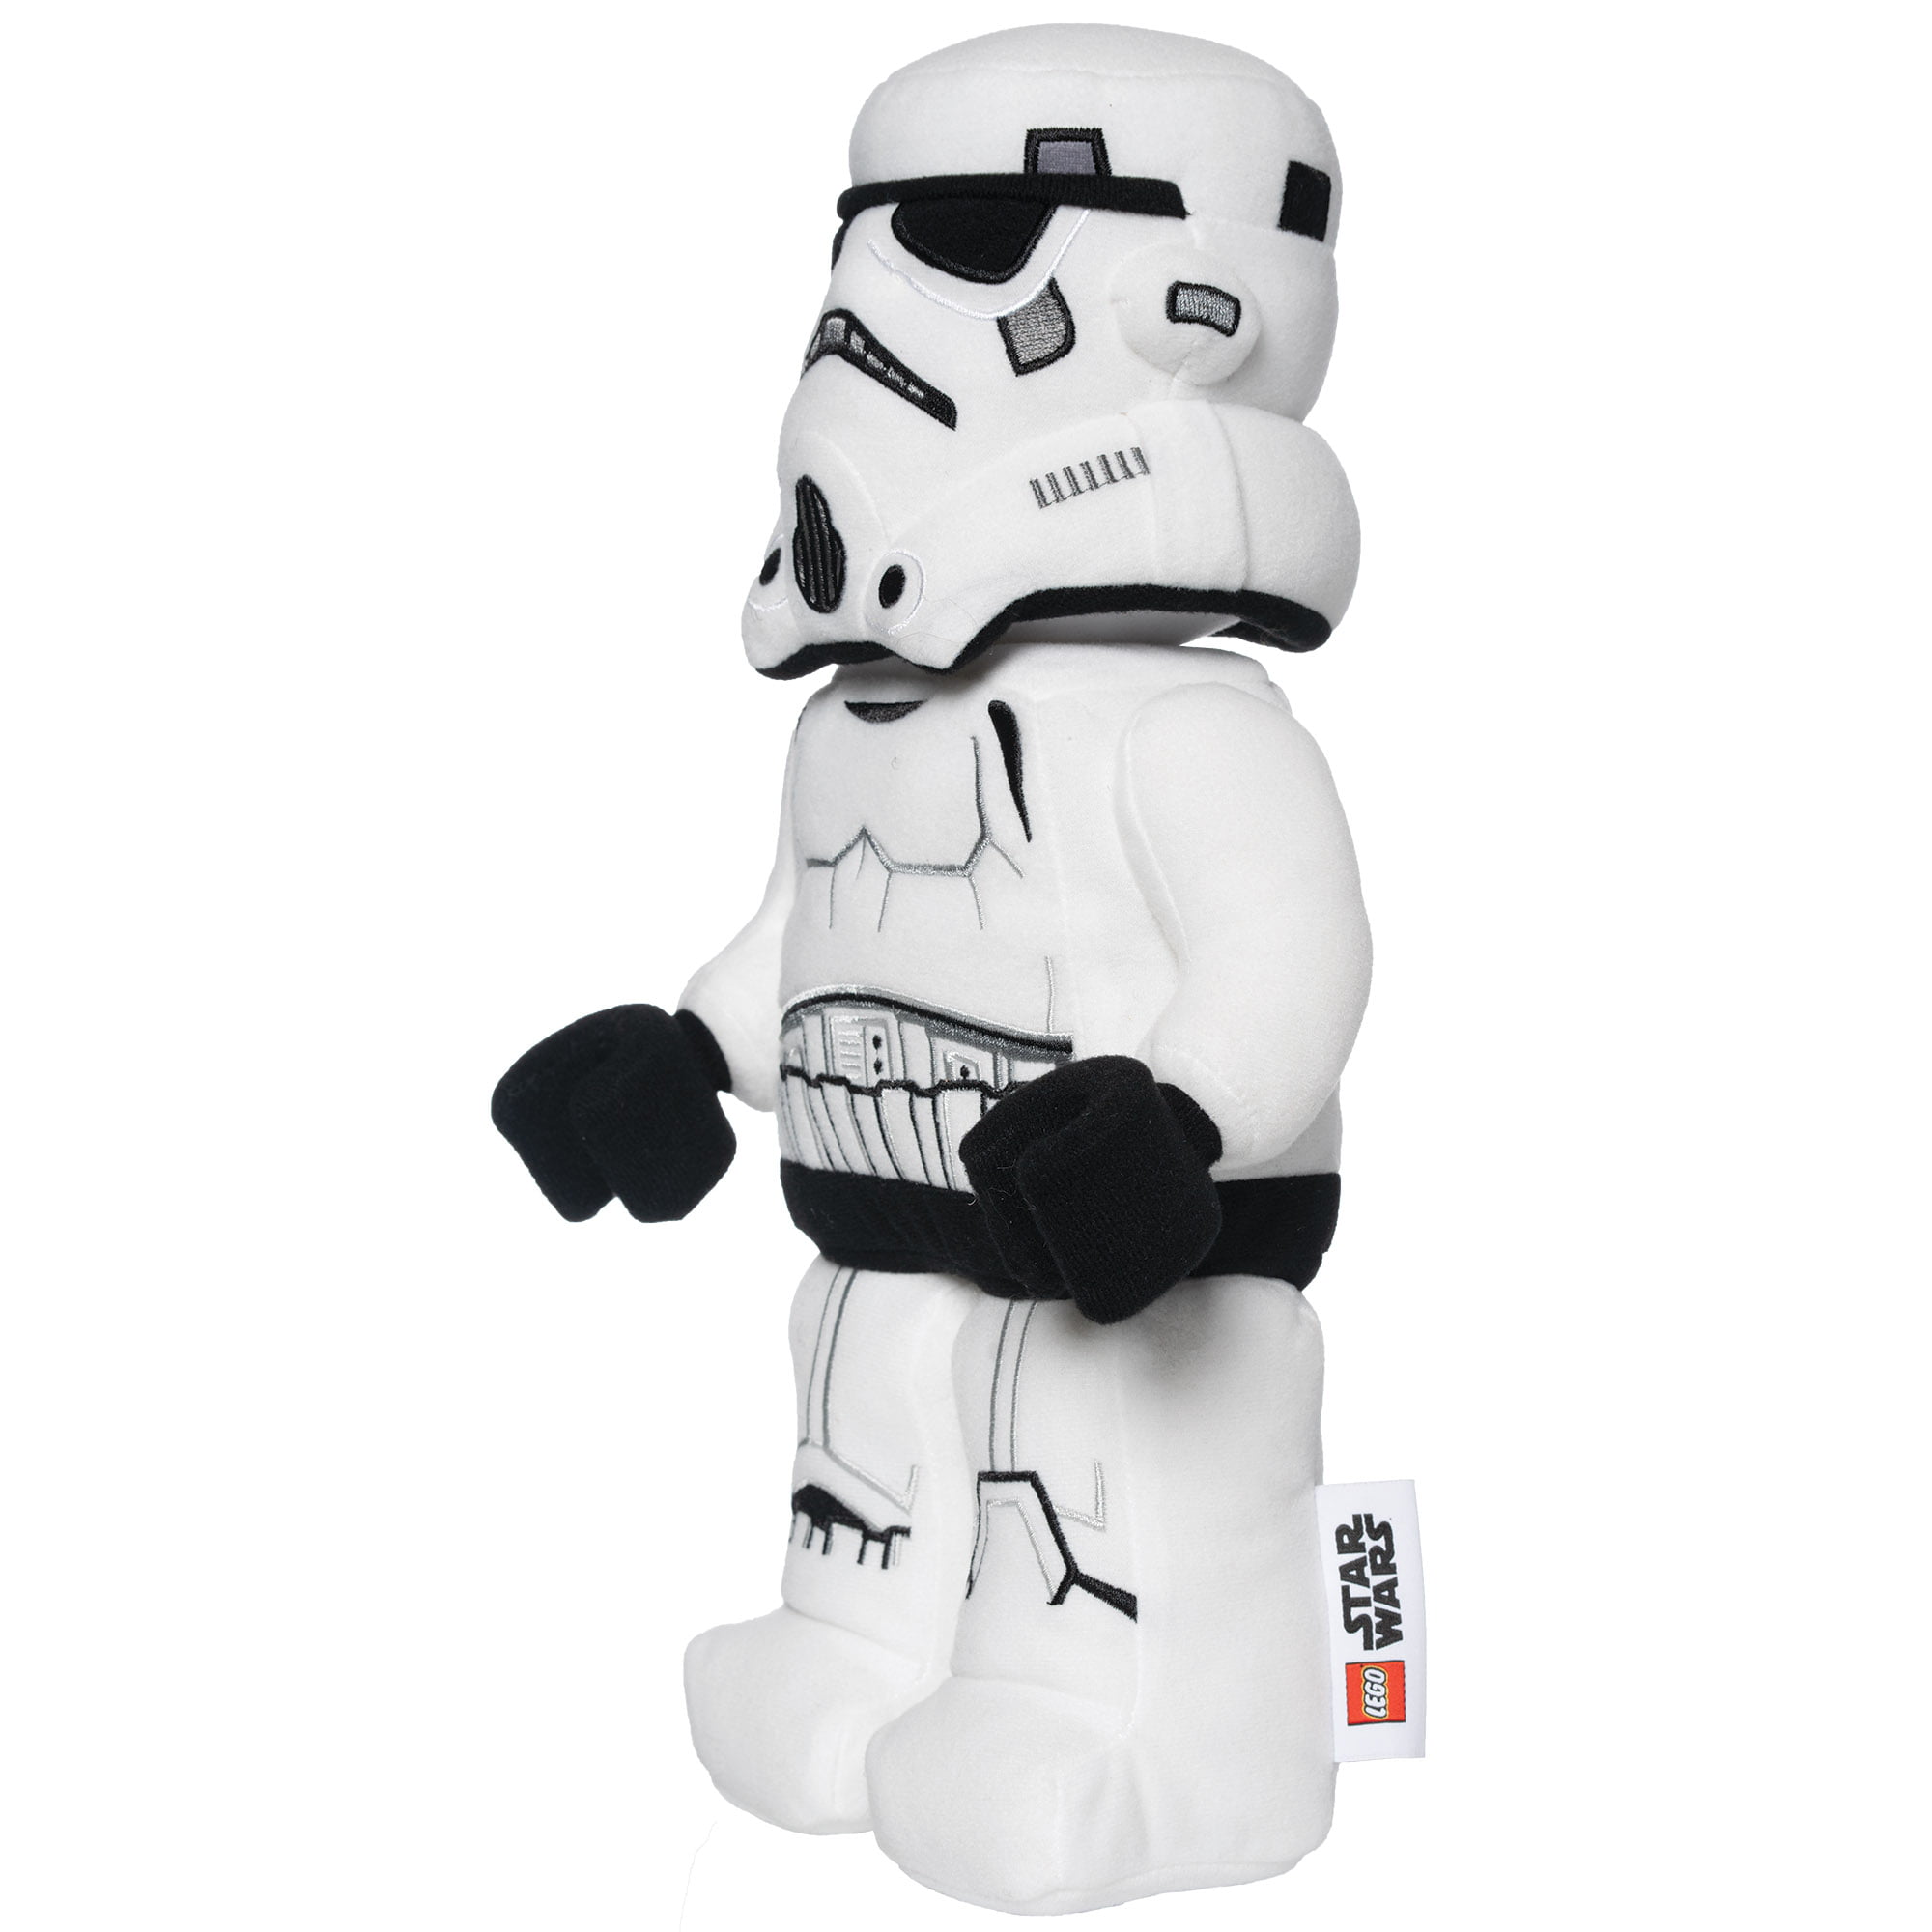 New LEGO Star Wars Stormtrooper 13” Tall Plush Toy Figure Fast Free Shipping! 